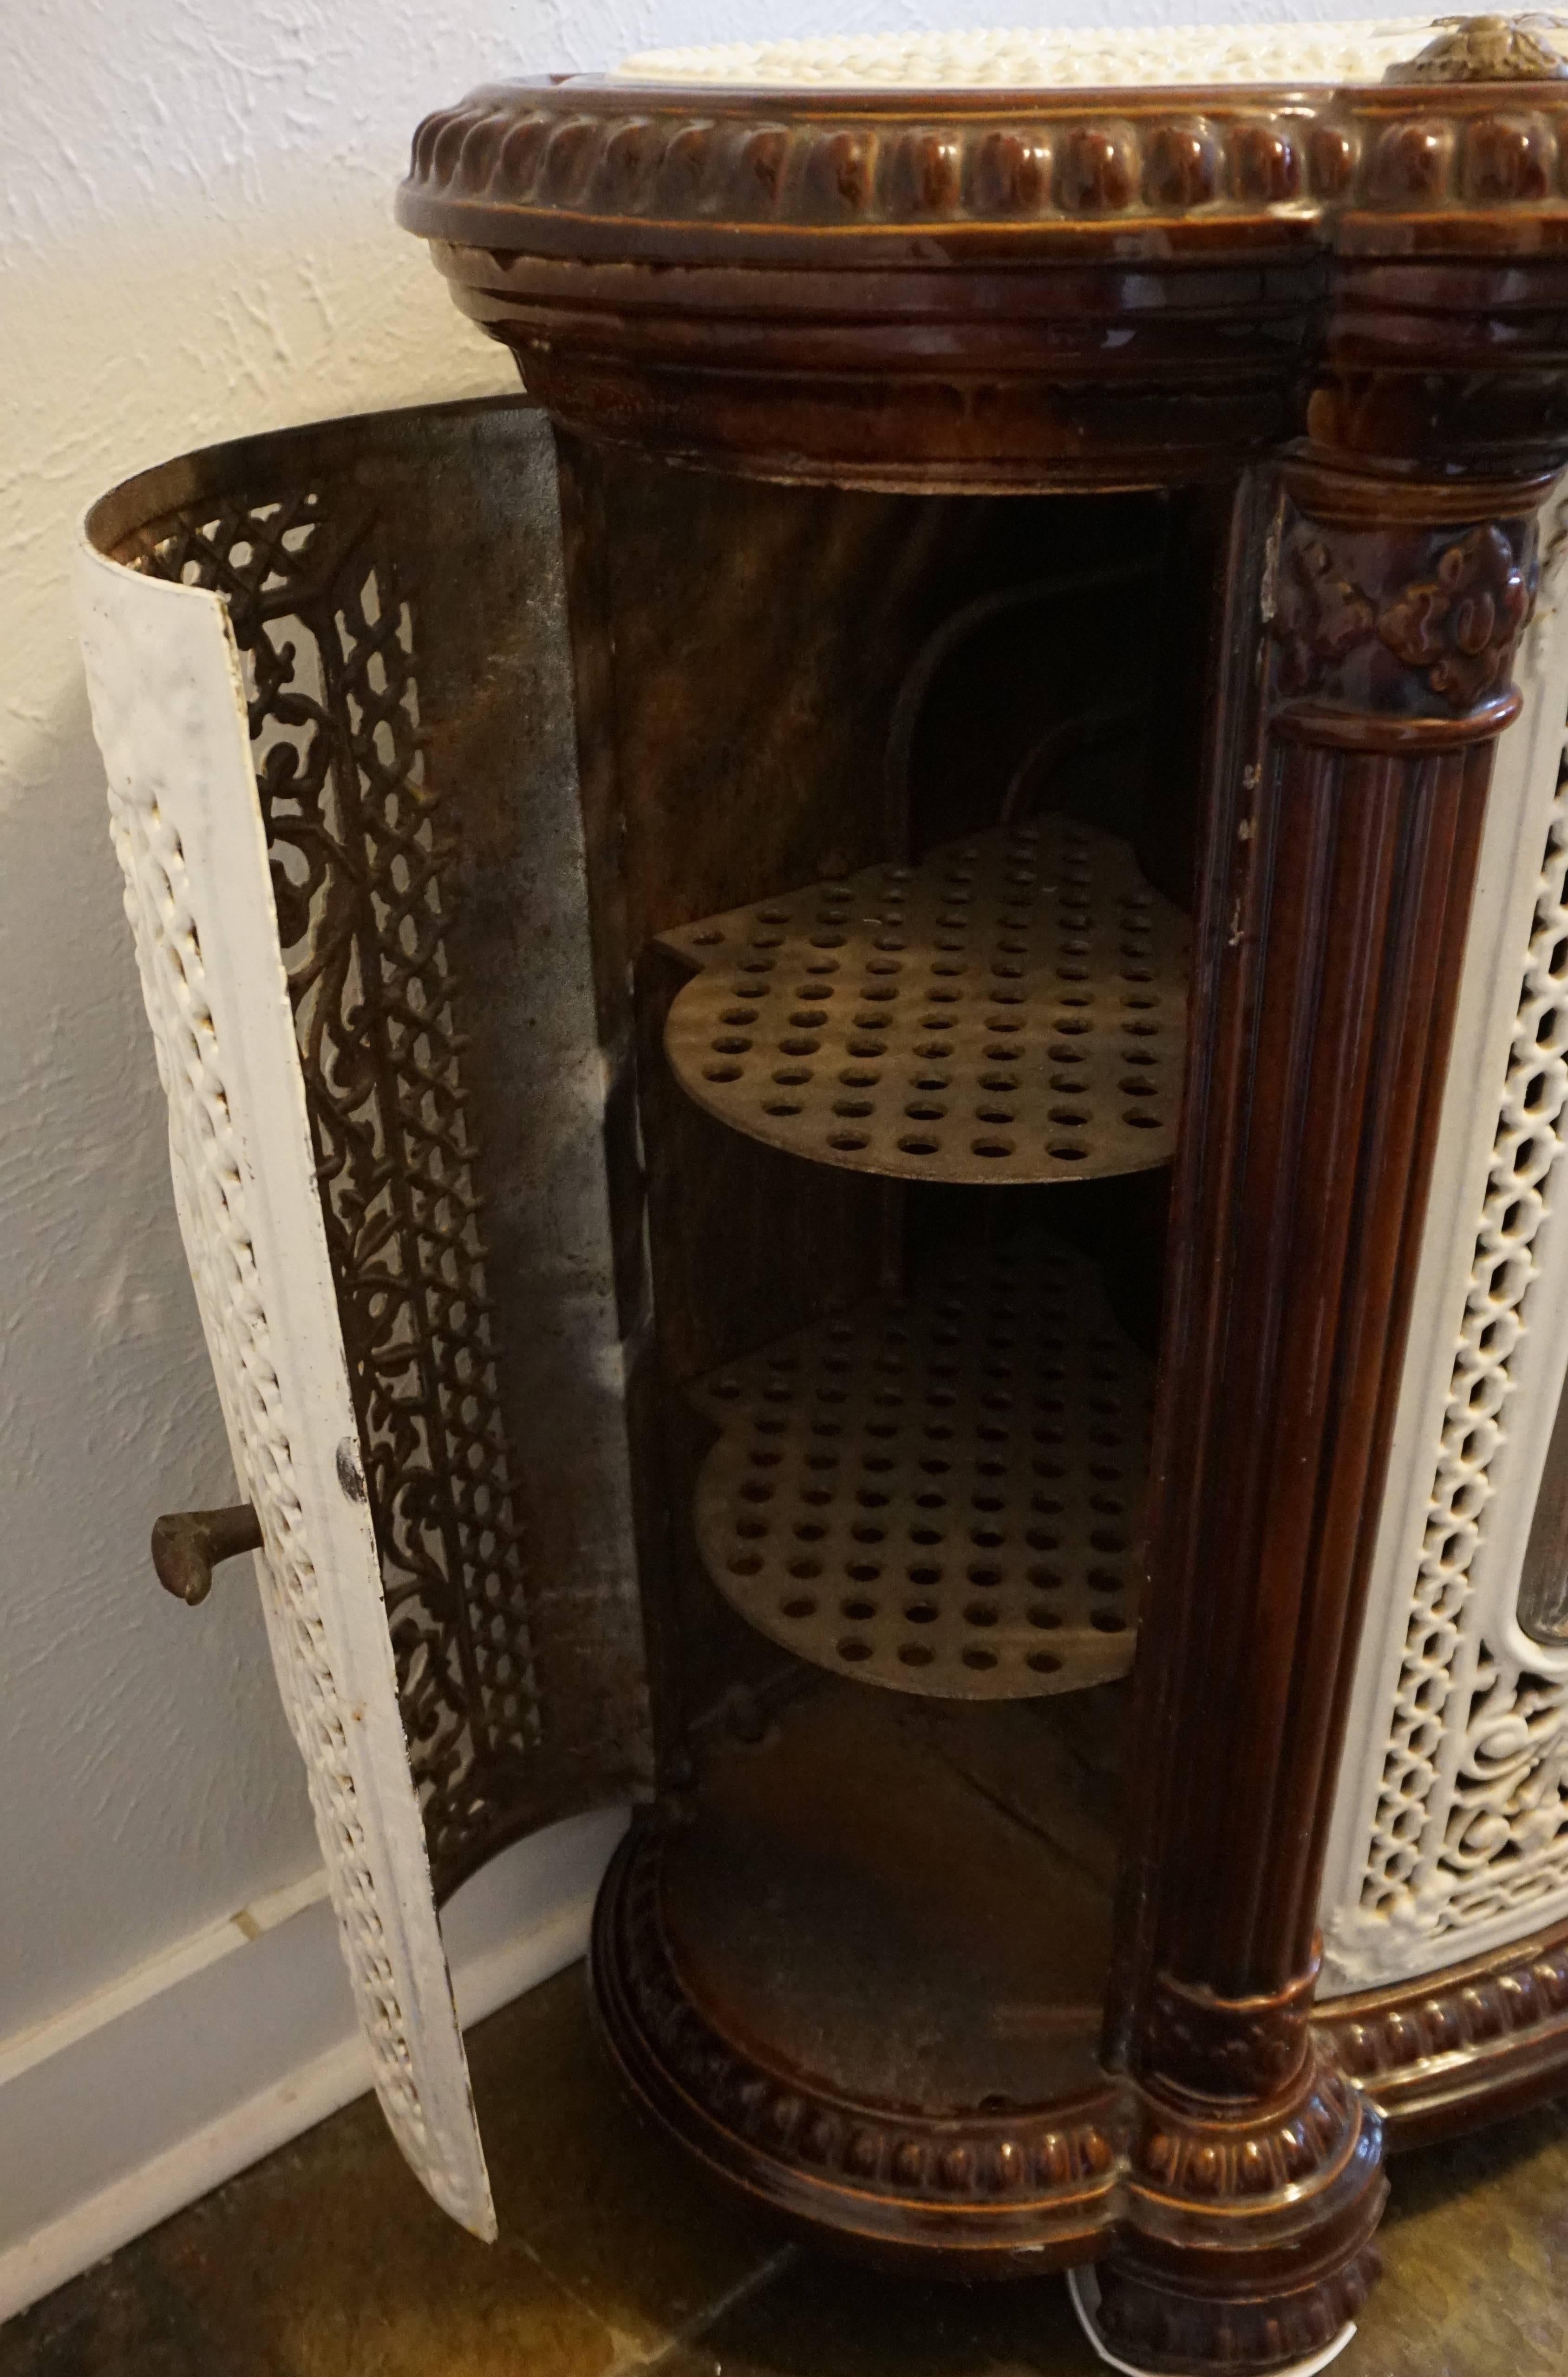 Early 20th Century Cast Iron Stove from 1900 Art Nouveau Godin